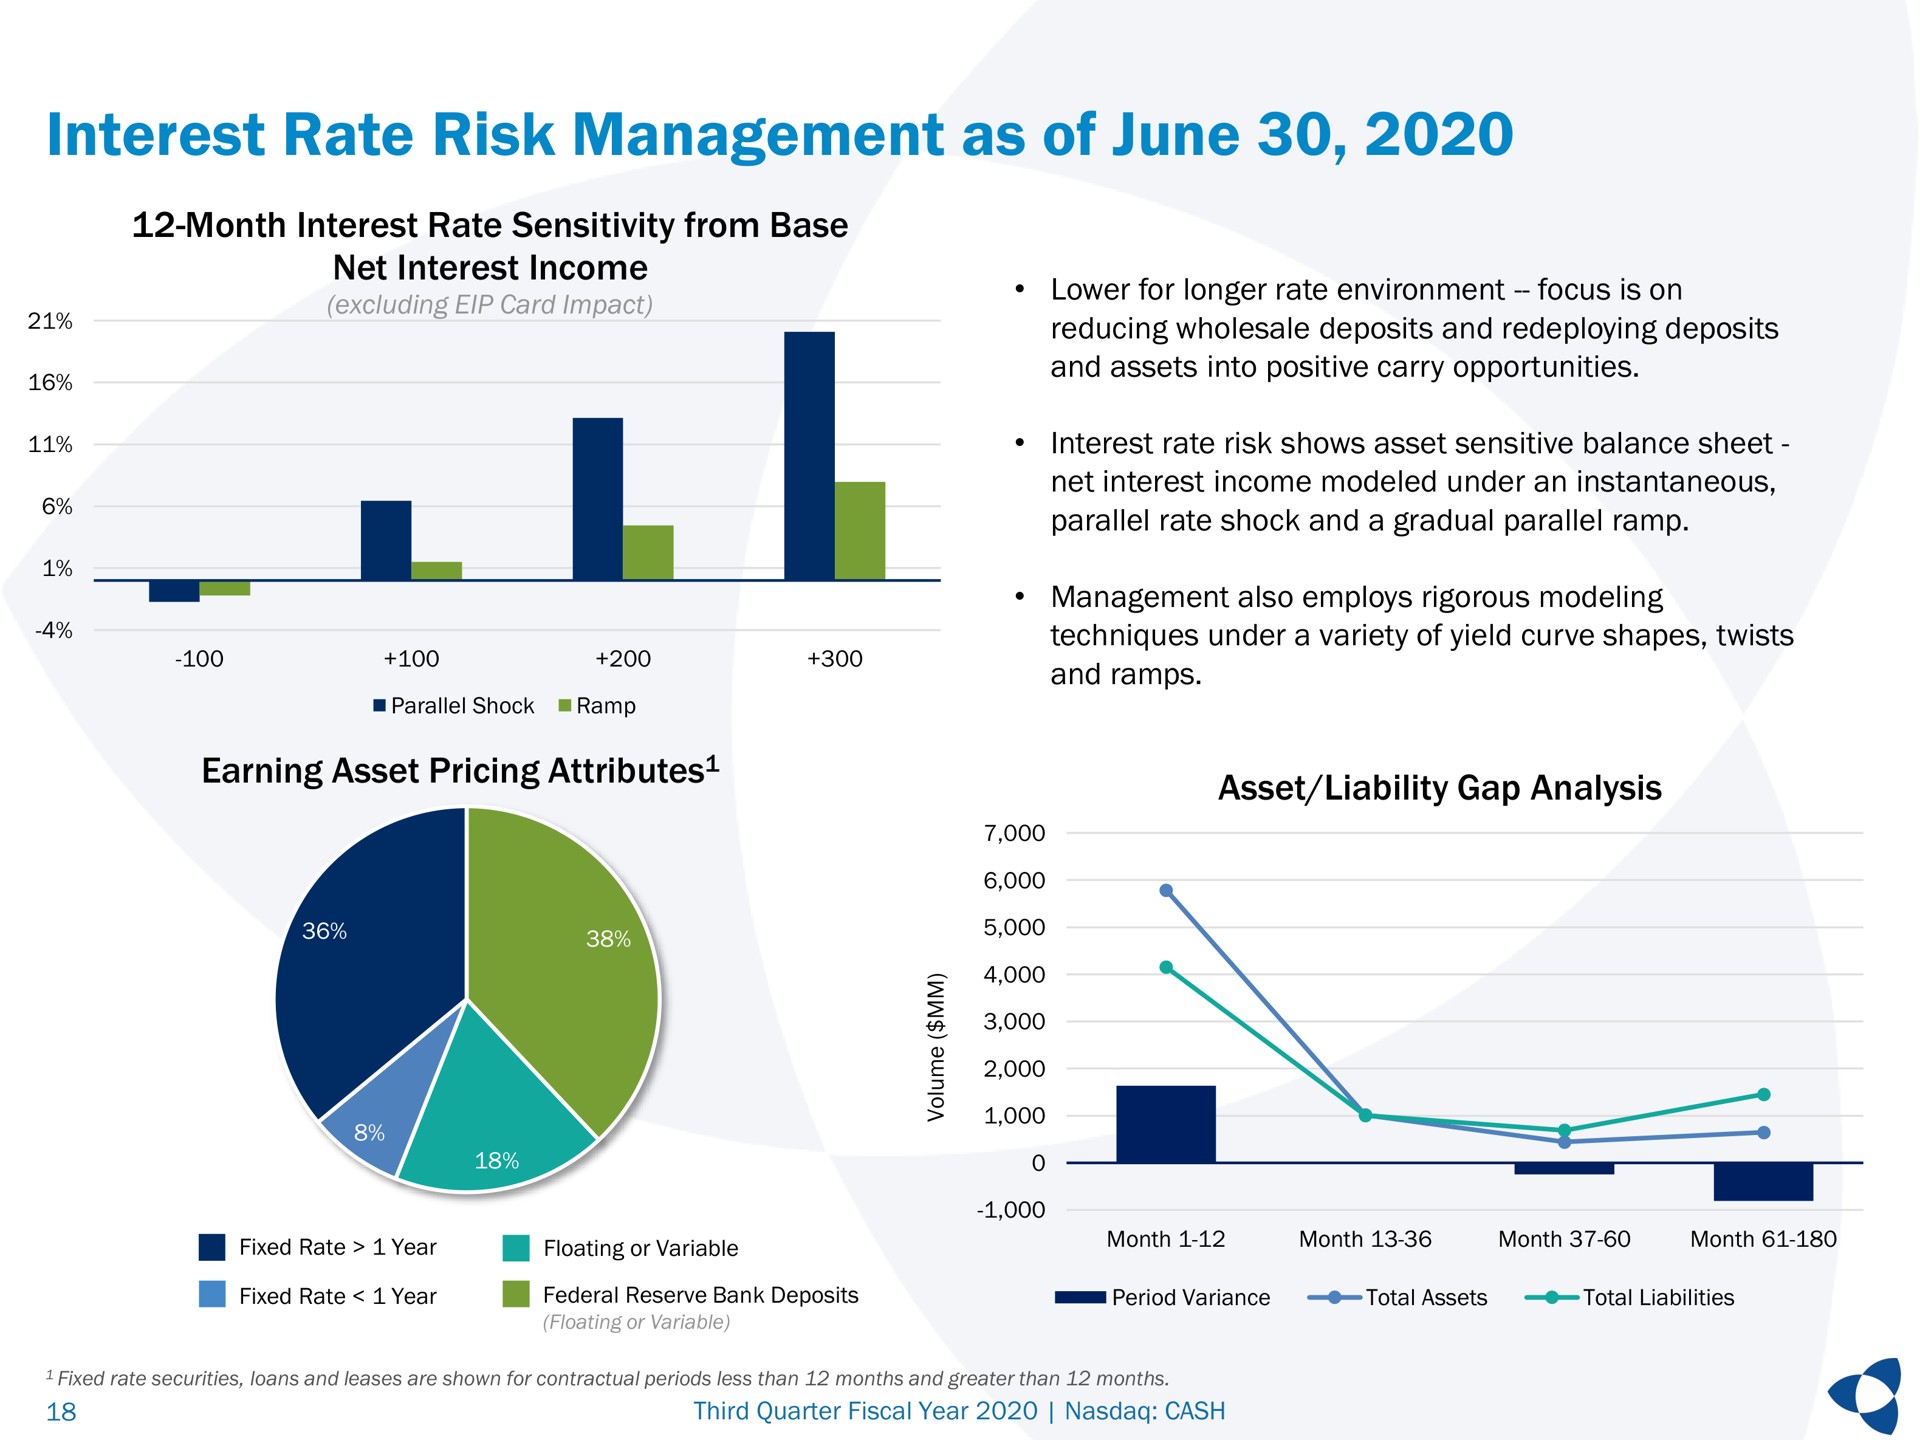 interest rate risk management as of june month interest rate sensitivity from base net interest income earning asset pricing attributes asset liability gap analysis attributes | Pathward Financial